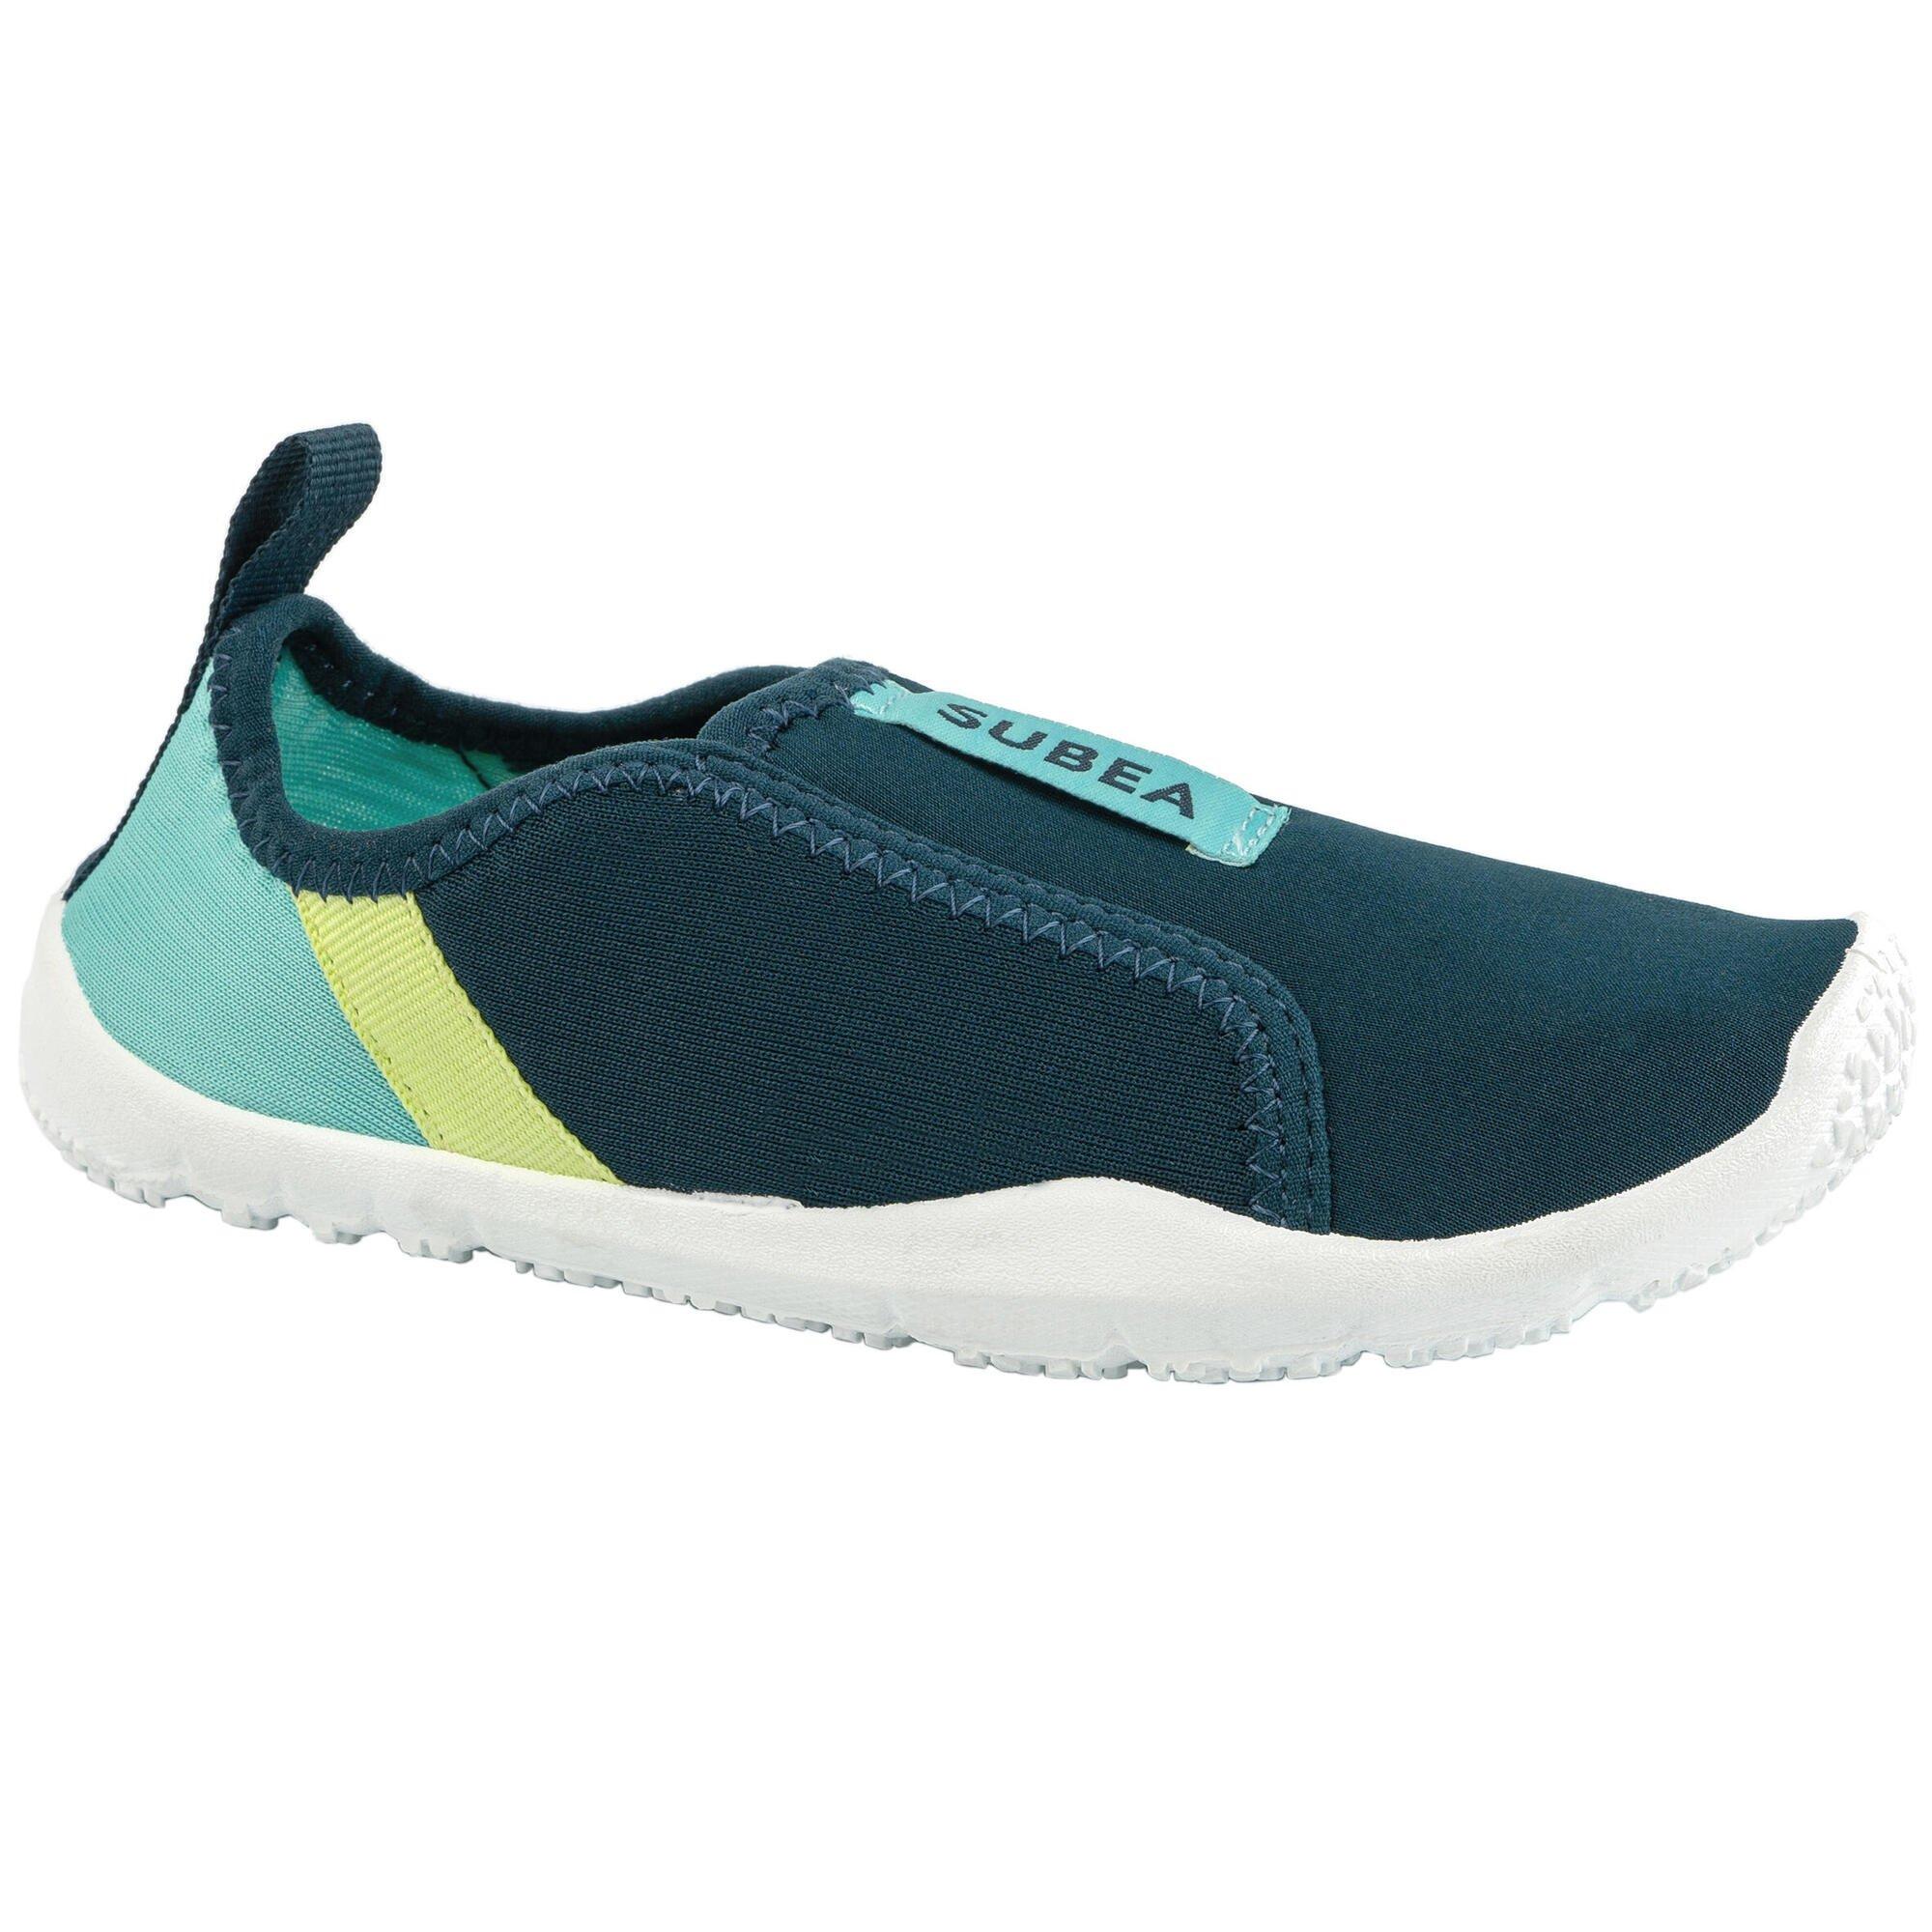 Decathlon Elasticated Shoes For- Shoes 120 Beach Party